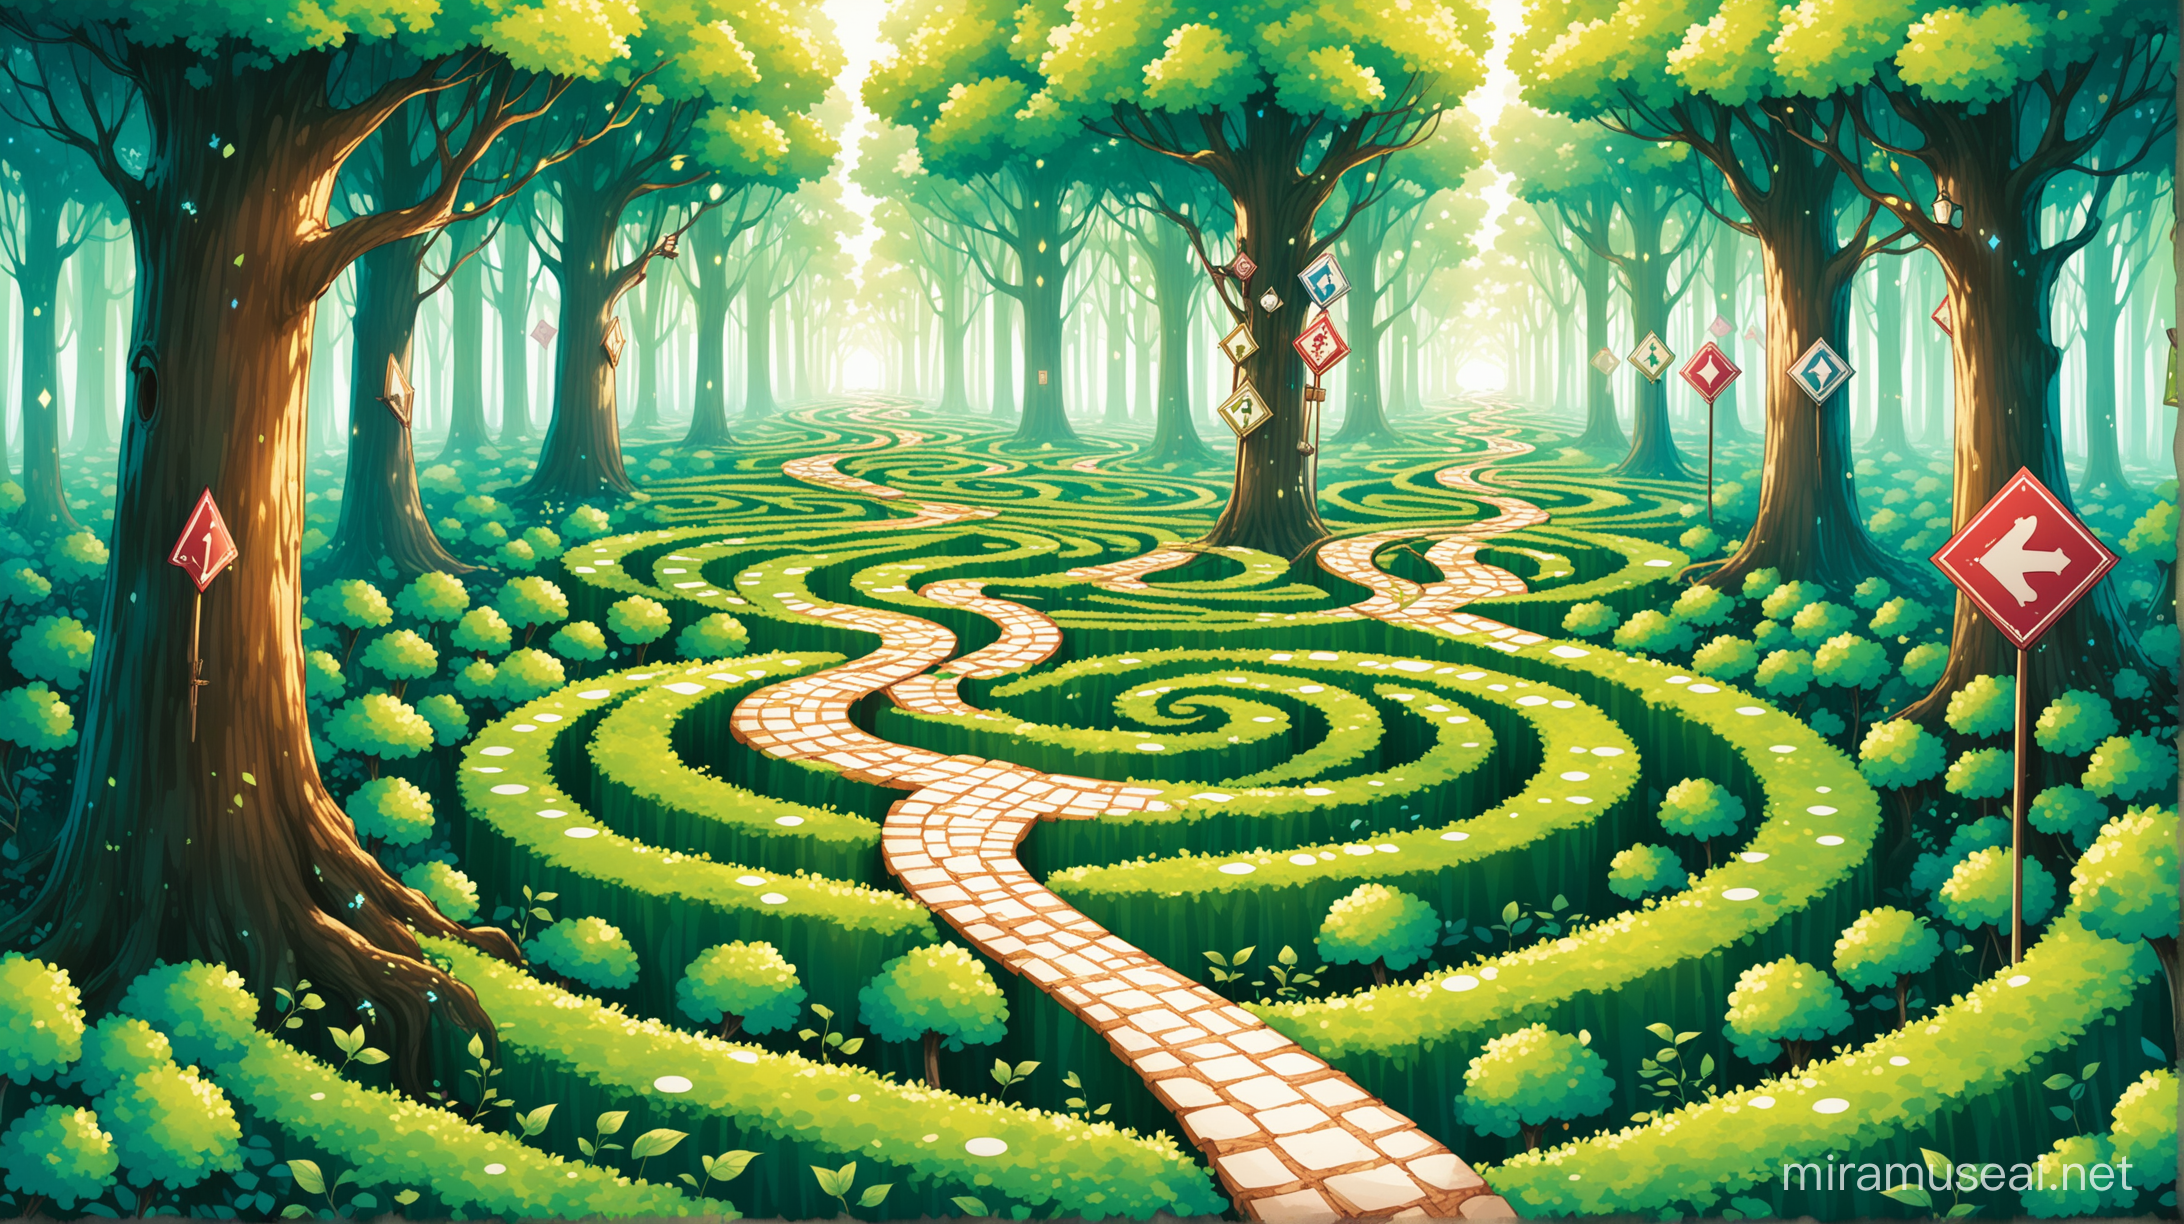 Enchanting Alice in Wonderland Forest with Winding Paths and Signposts